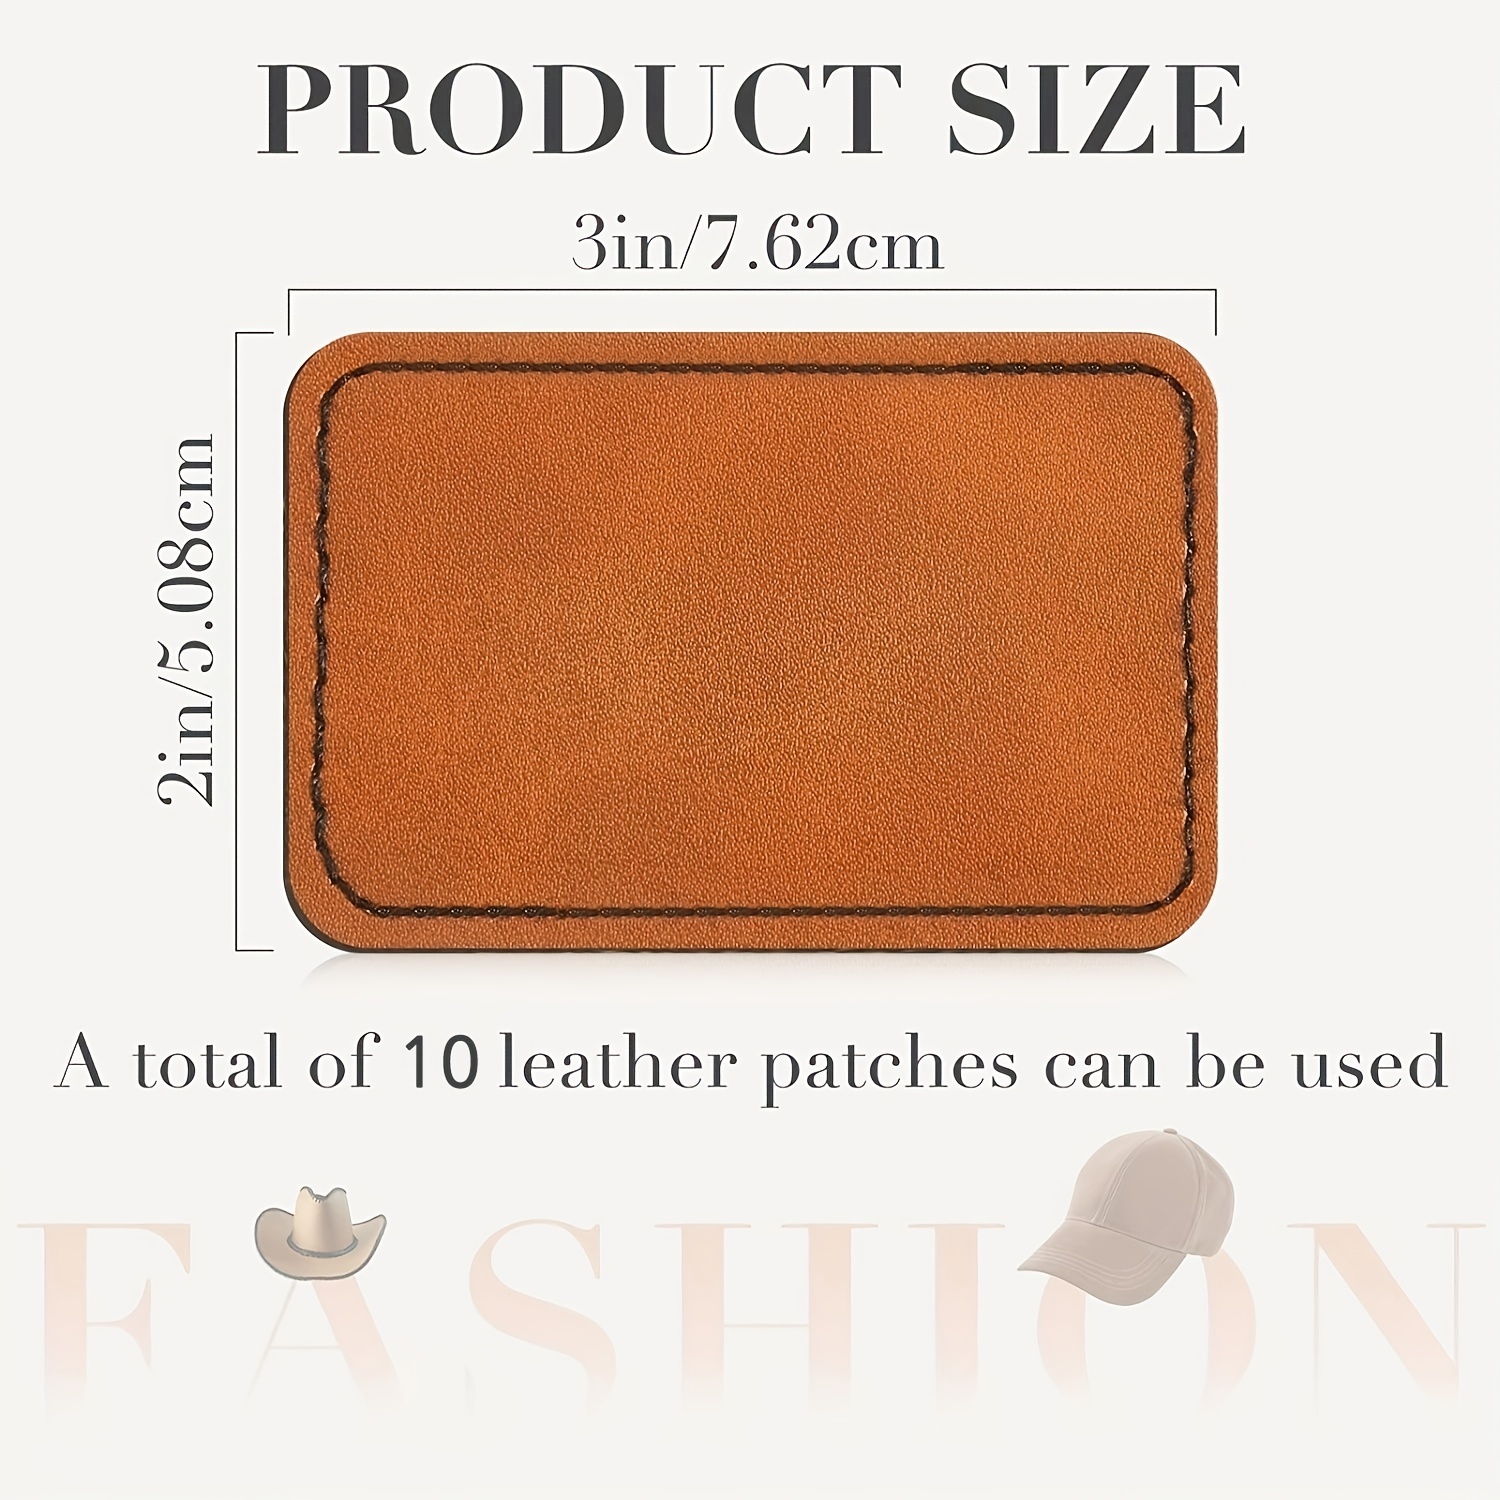 20 Pcs Rectangle Leatherette Hat Patches with Adhesive, Rustic Leatherette  Custom Patches Faux Blank Leather Patches for Hats, Custom Fabric Repair  Sew Laser Supplies, Clothes Bags DIY Crafts (Khaki)